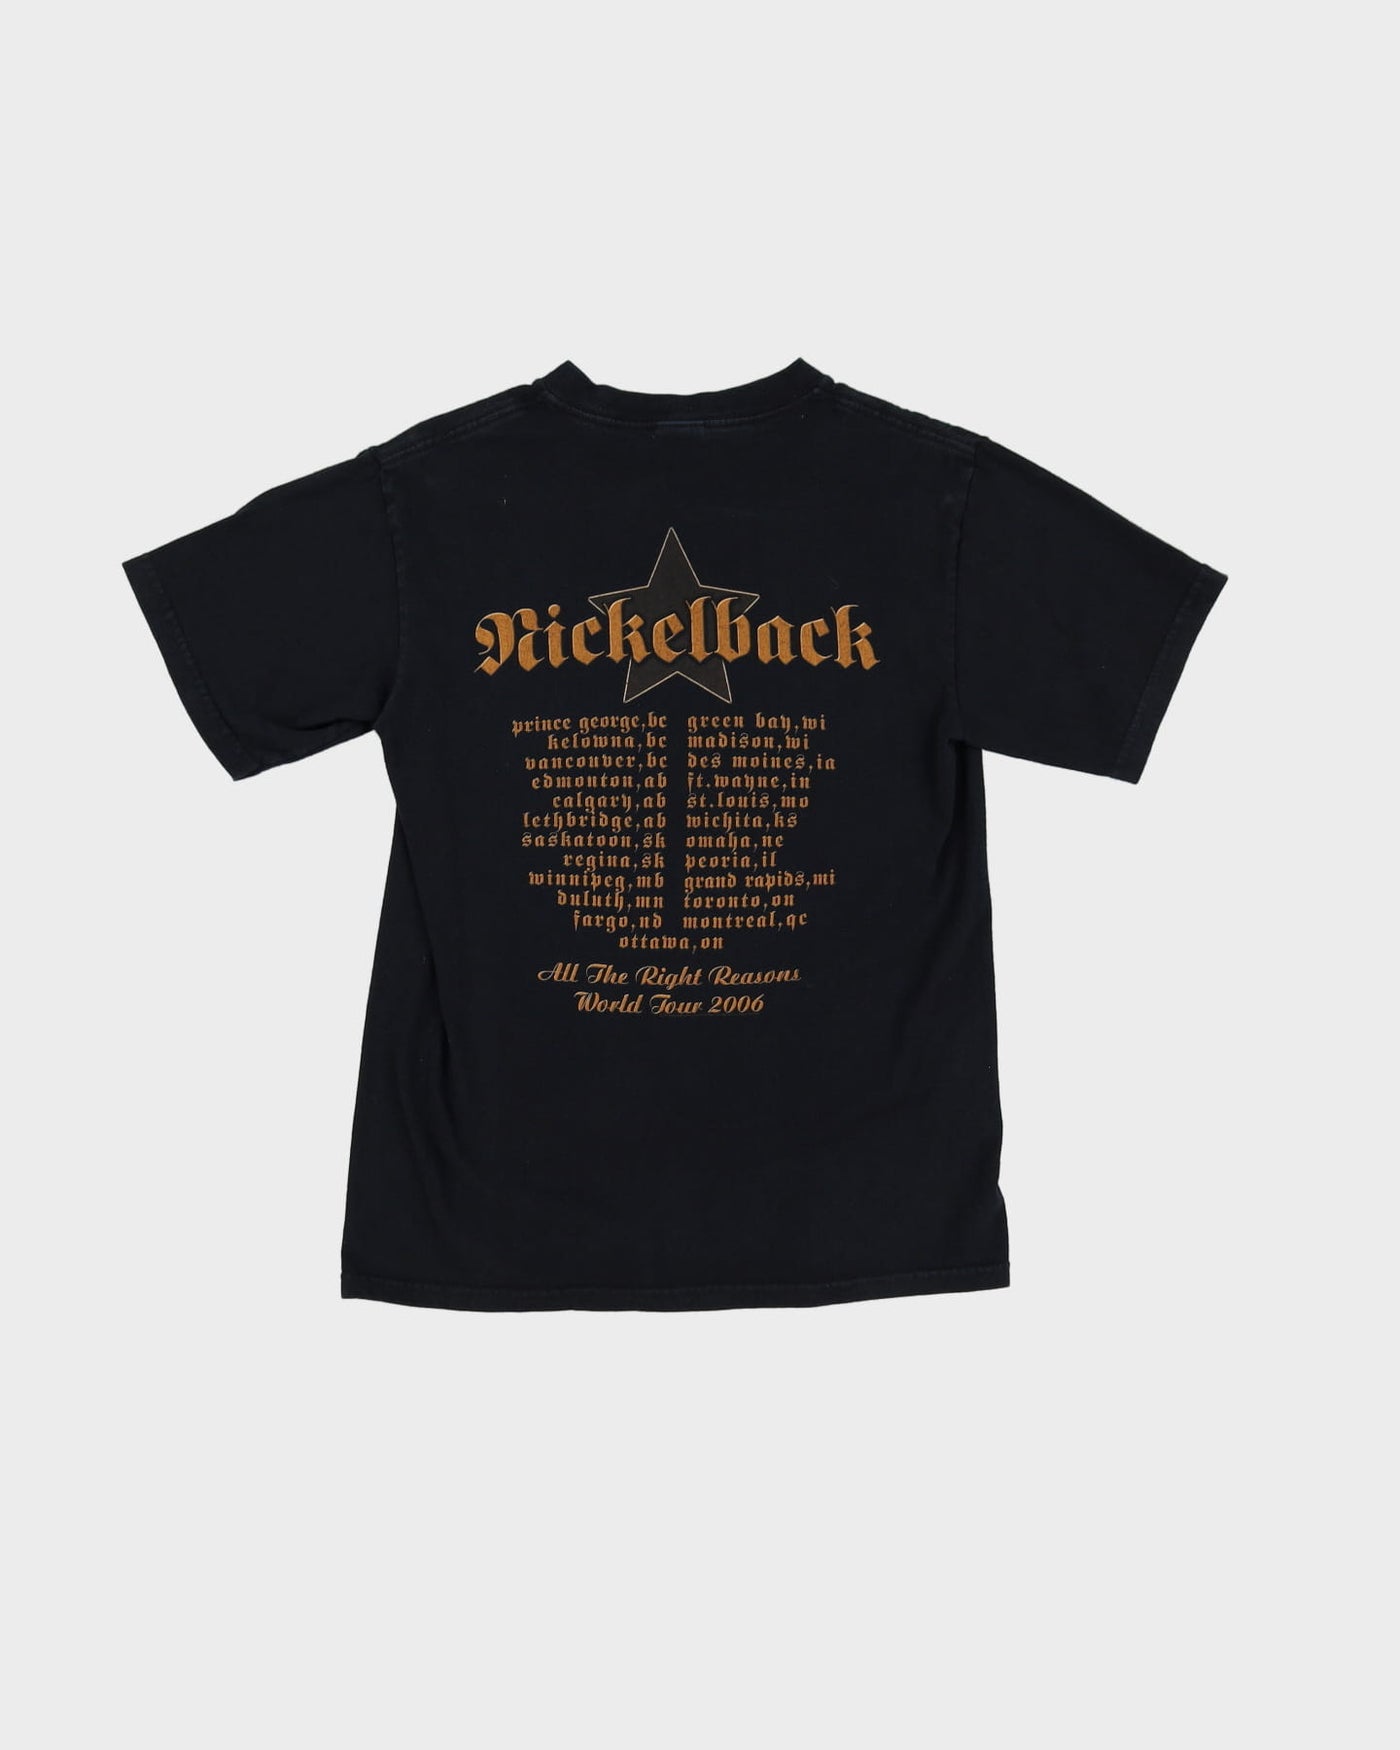 2006 Nickleback All The Right Reasons Tour Black Band T-Shirt - XS / S